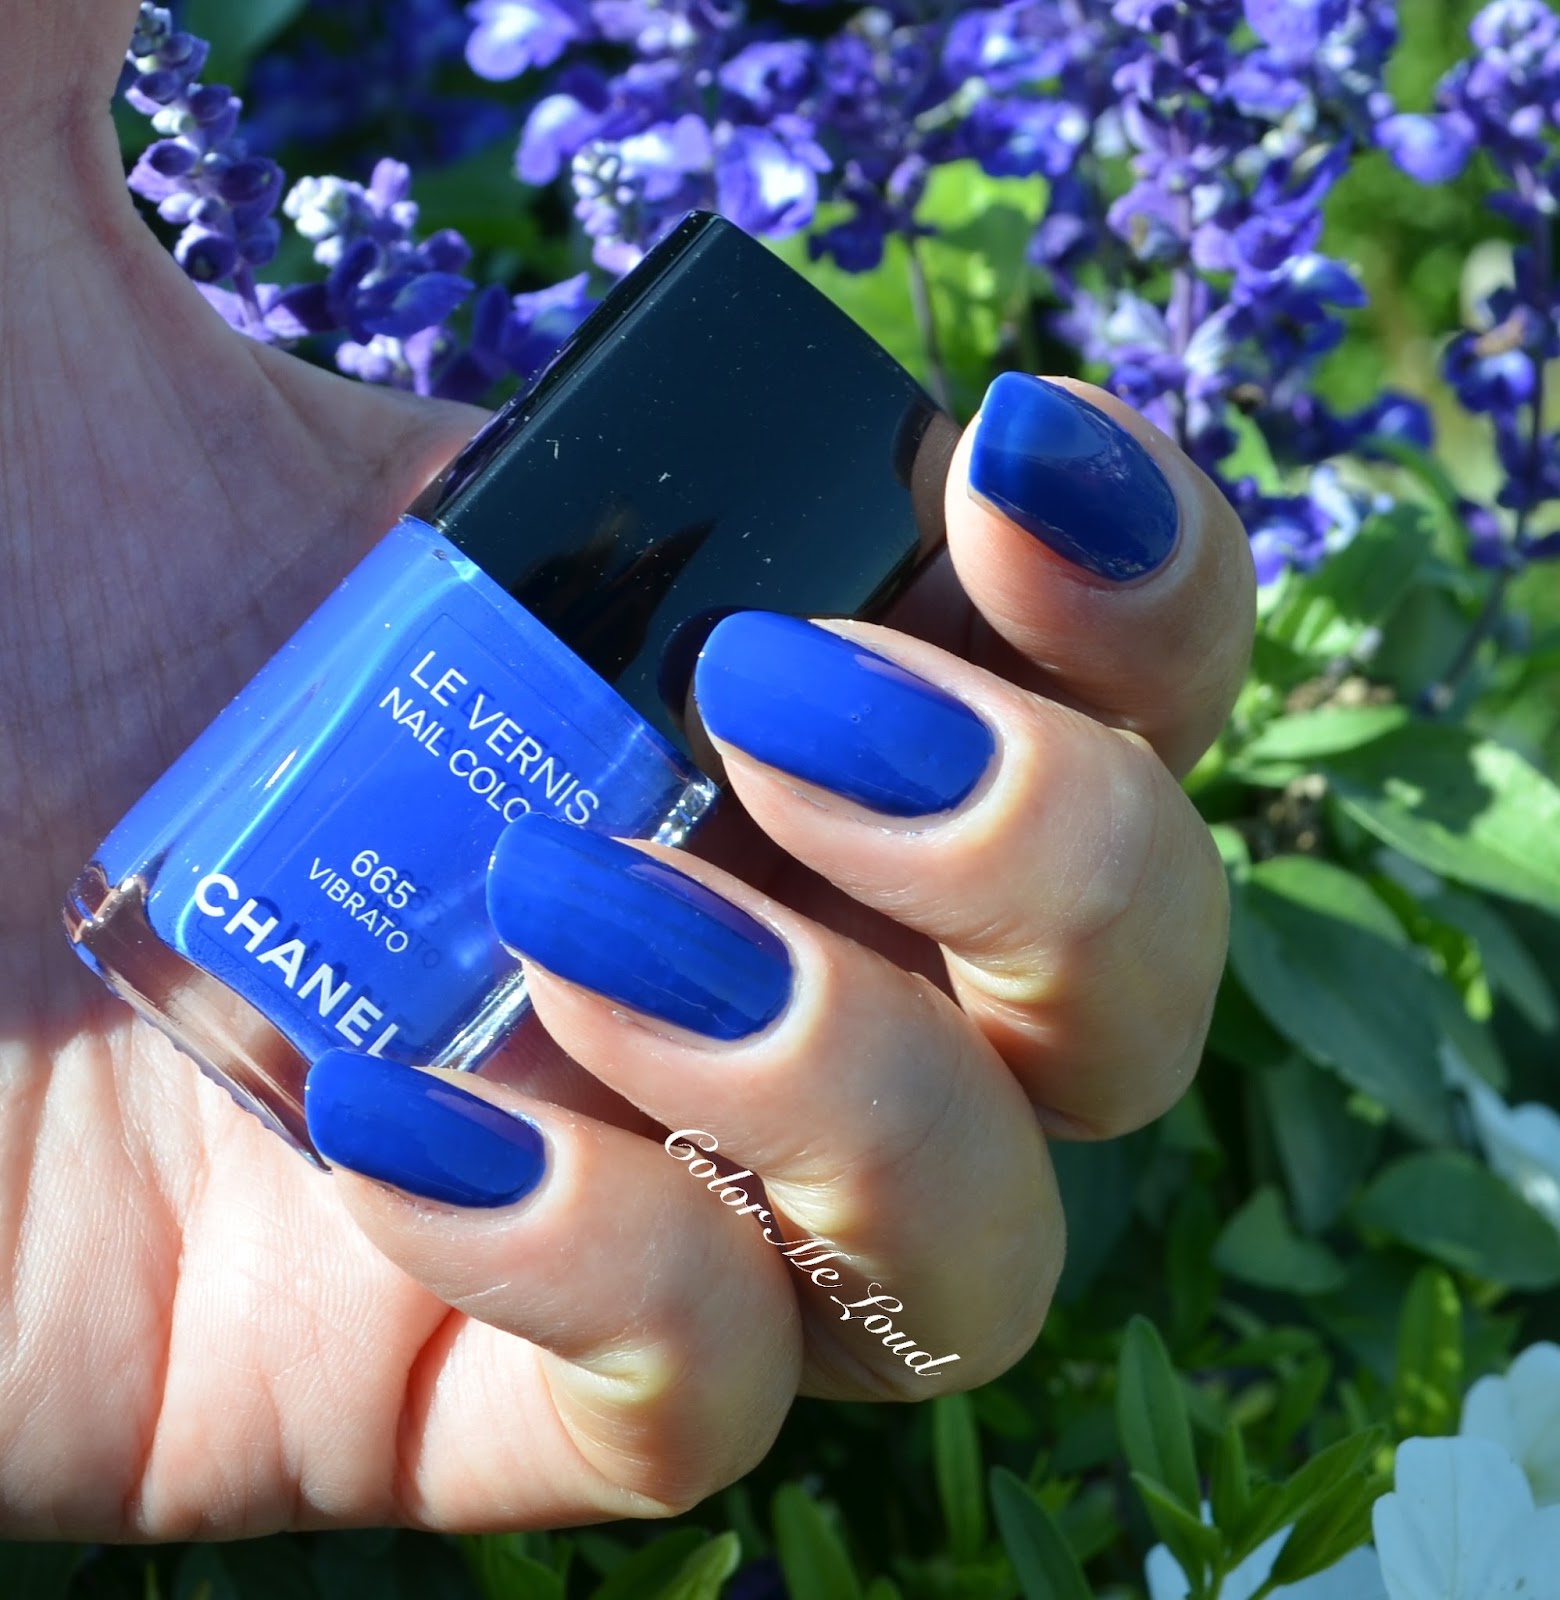 Chanel Le Vernis #665 Vibrato, #681 Fortissimo for Blue Notes Collection, Review, Swatch & Comparison | Color Me